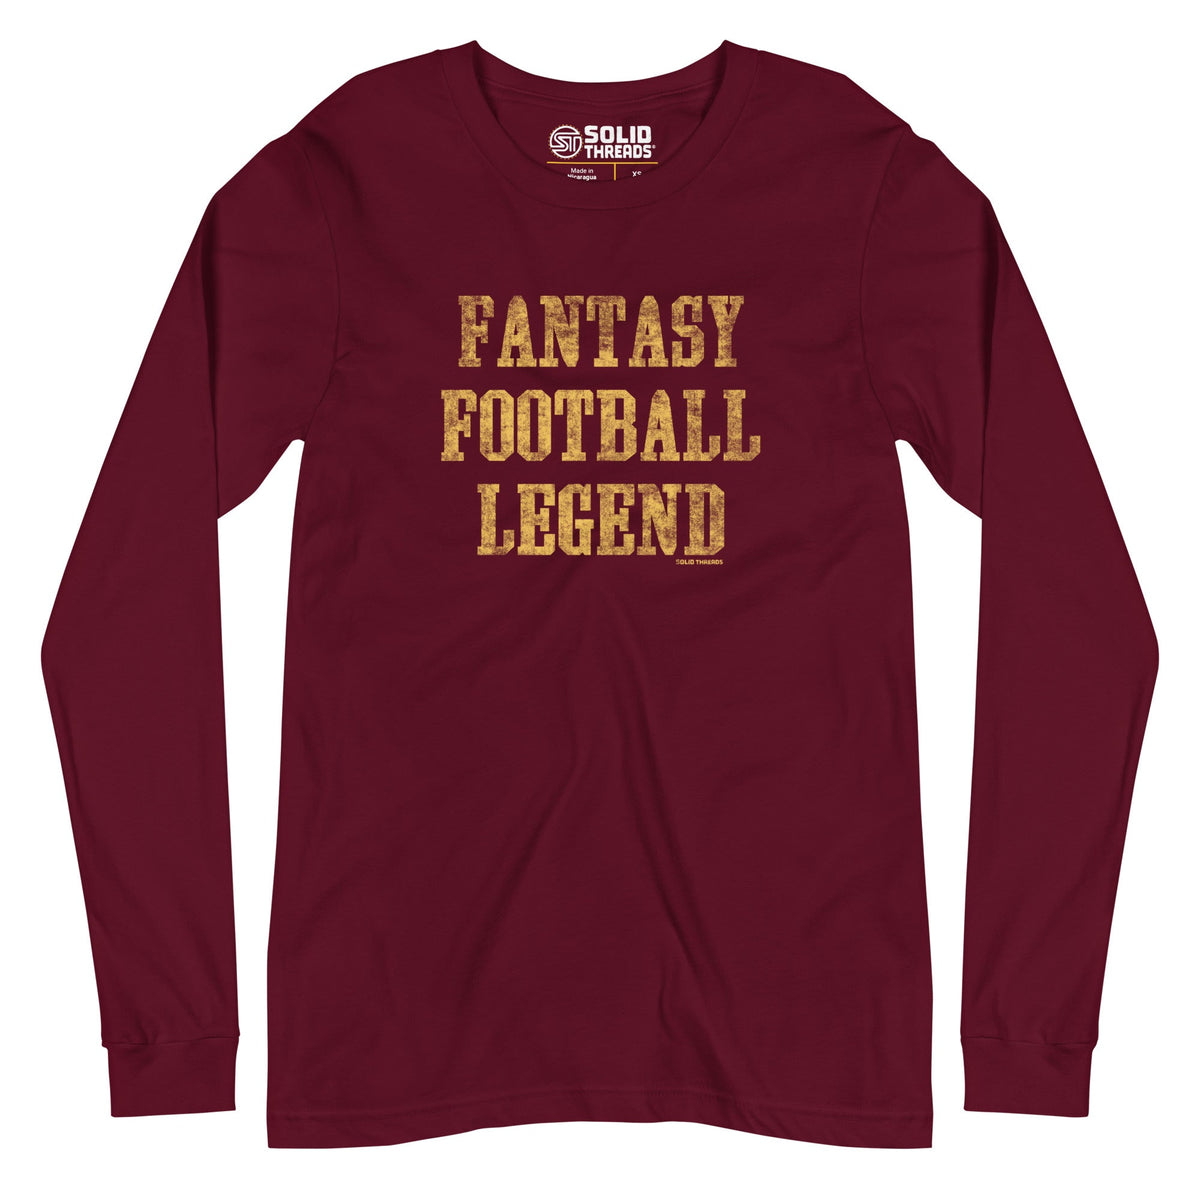 Men’s Fantasy Football Legend Vintage Graphic Tee | Funny Sports T shirt | Solid Threads